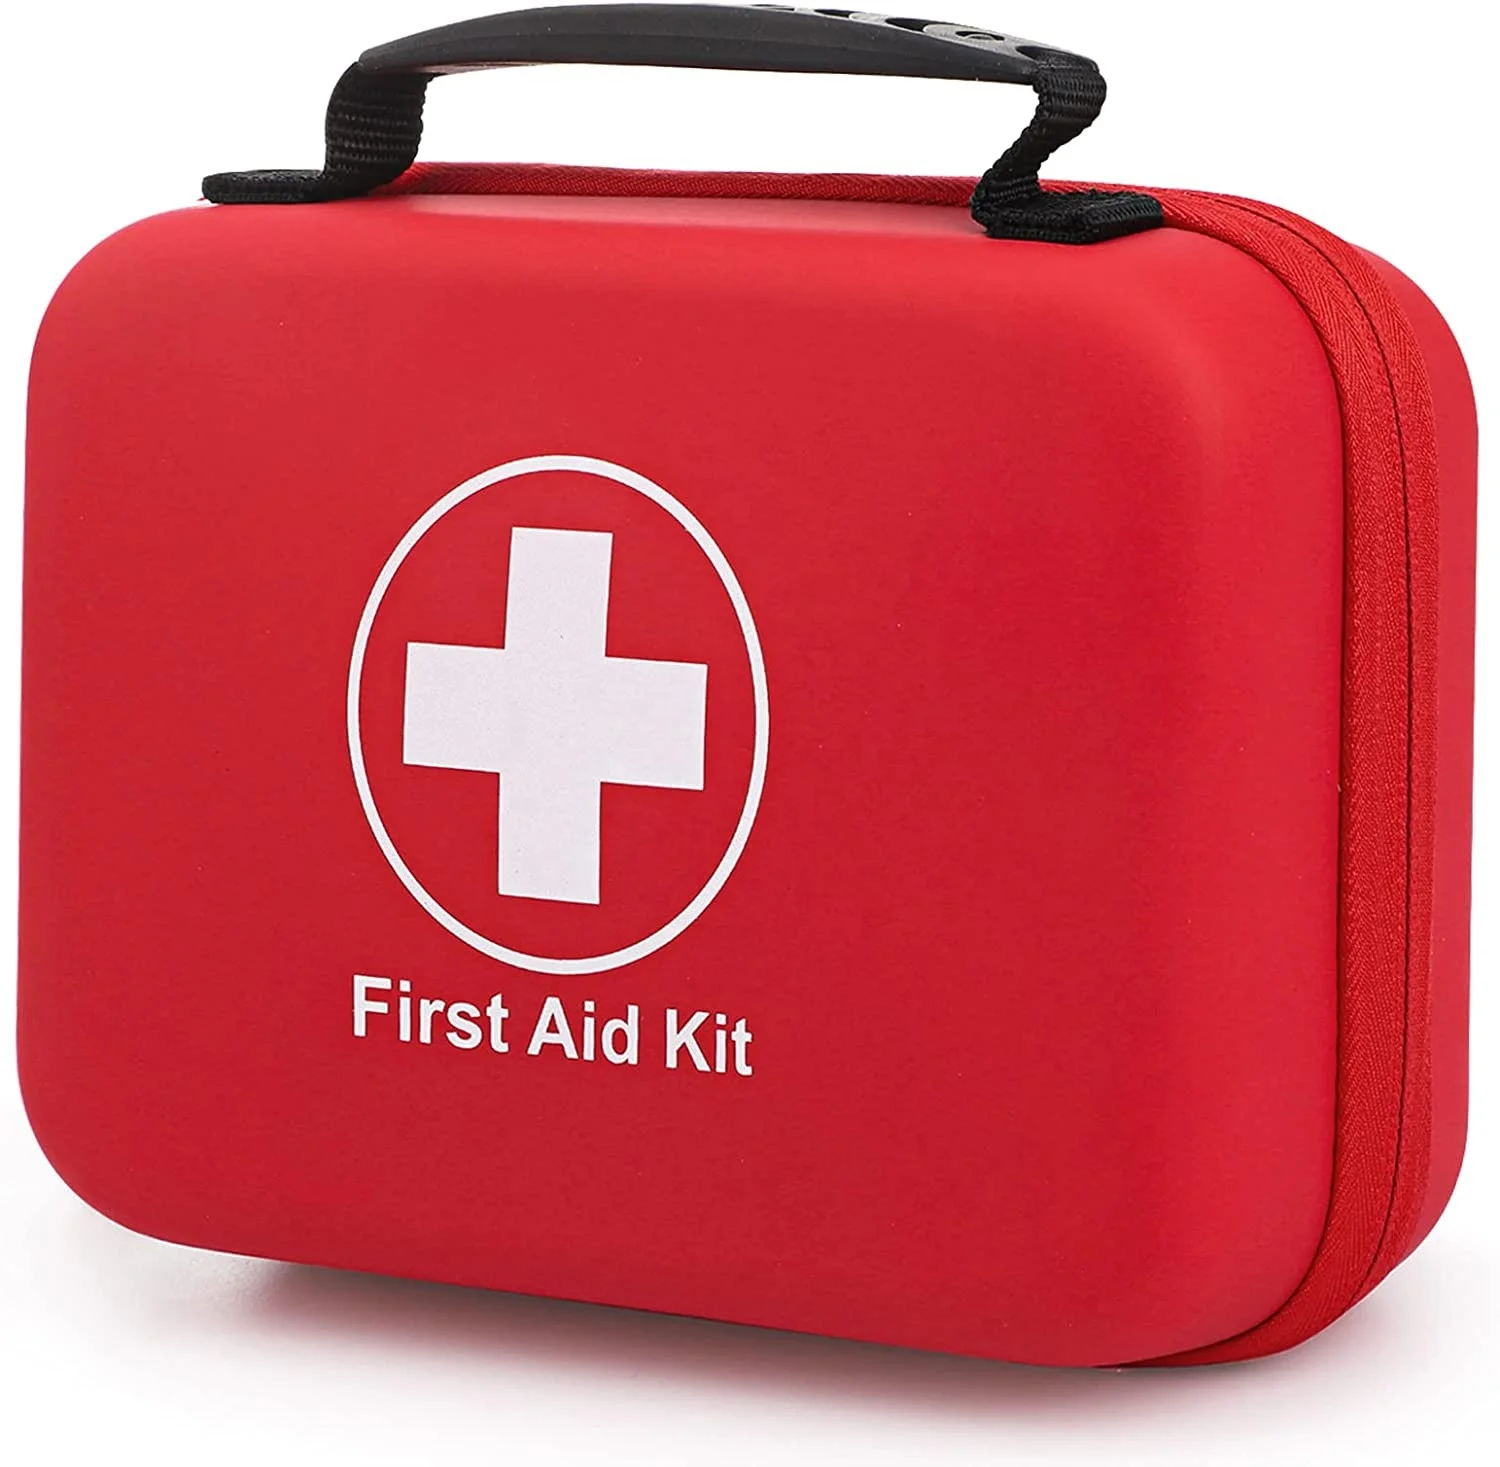 Travel First Aid Kit Bag 230 Piece Waterproof All Purpose Use Outdoor Indoor Car Hiking Big Storage Case